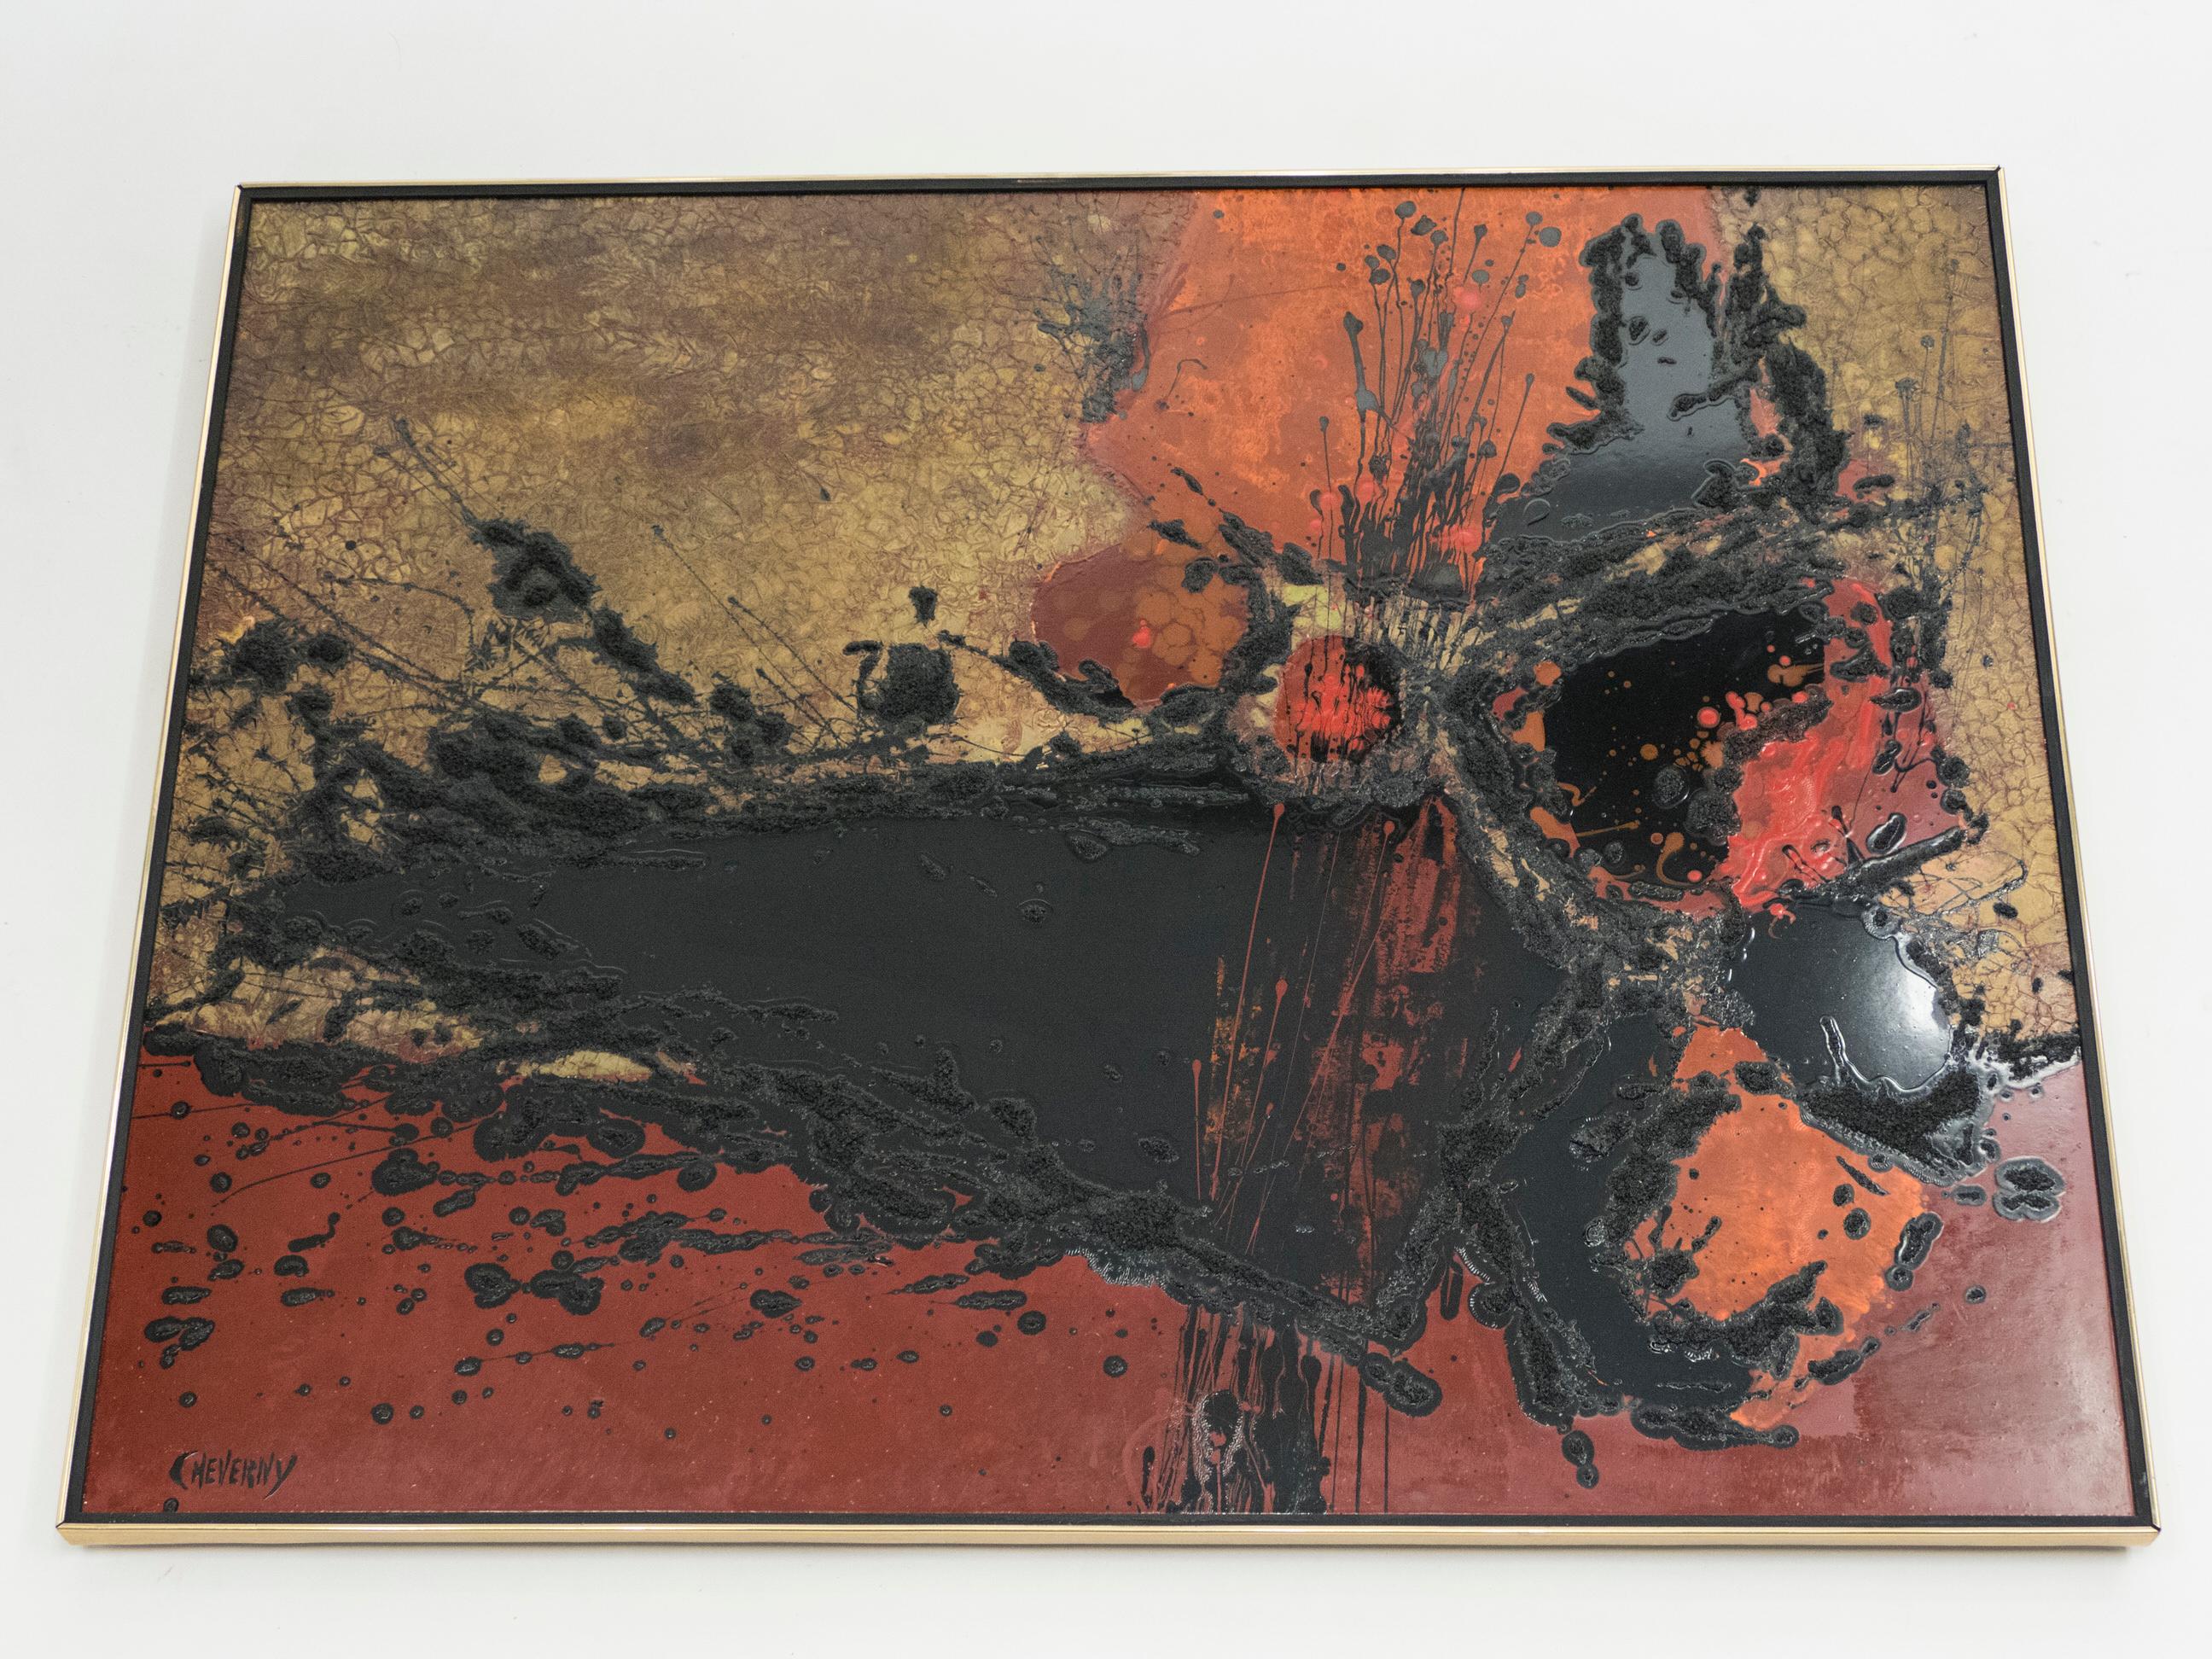 Midcentury design and abstract art come together in this red, black, and orange lacquer panel. It’s by prominent 20th century French artist and designer Philippe Cheverny and dates from circa 1970.
 
The bold splashes of lacquer make this large